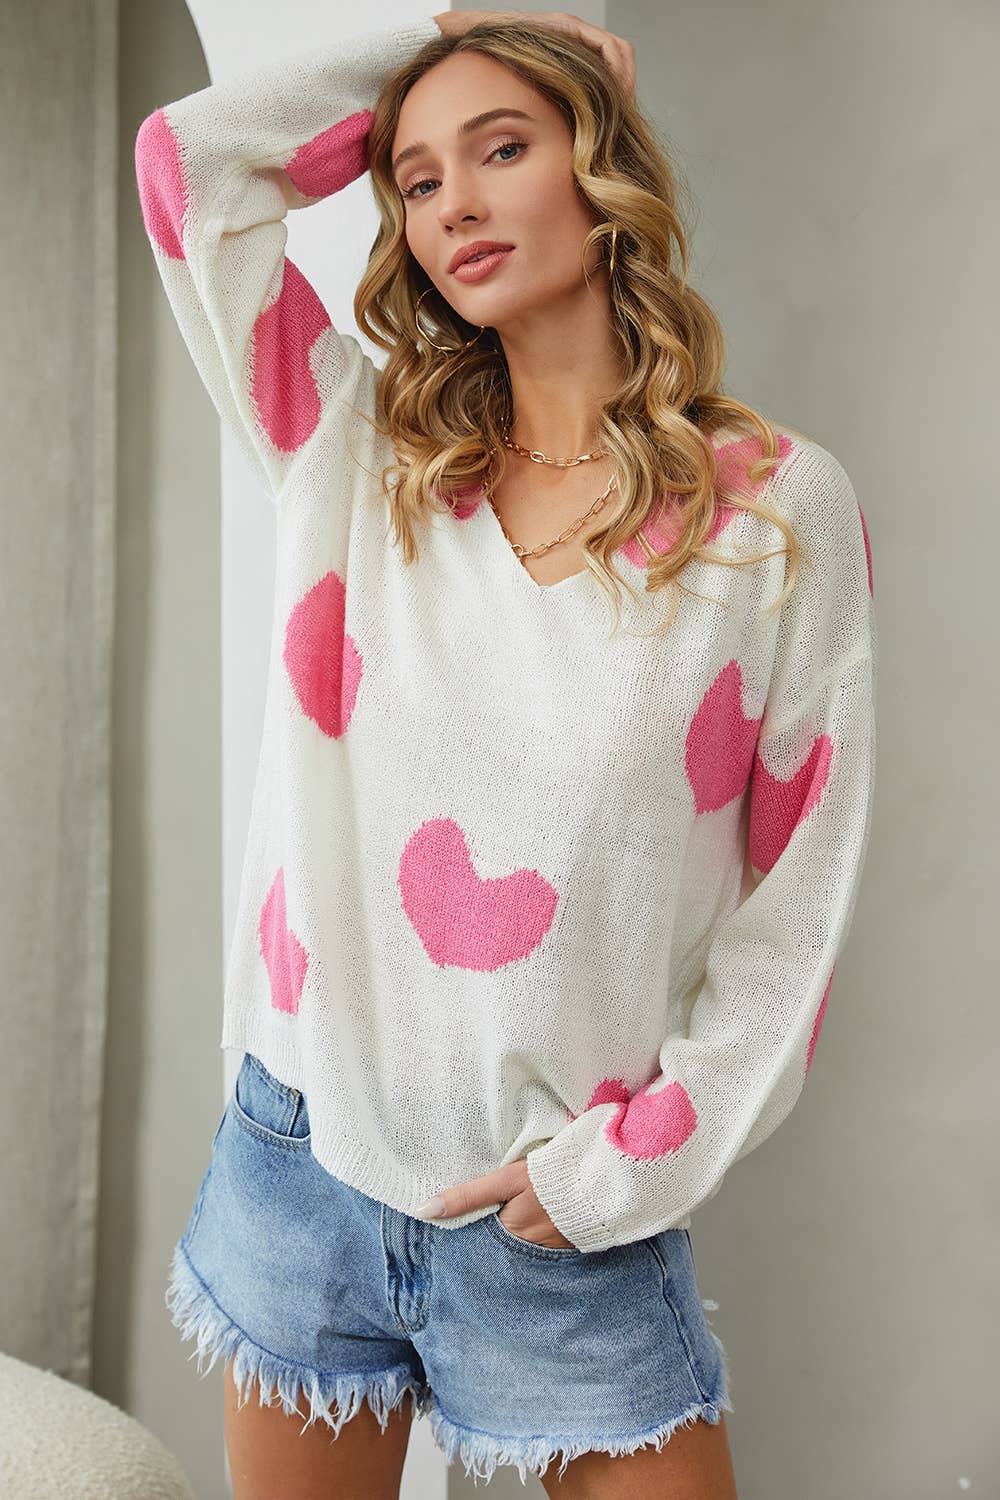 SMULTI HEART SWEATER: IVORY PINK : IVORY PINK / S/M